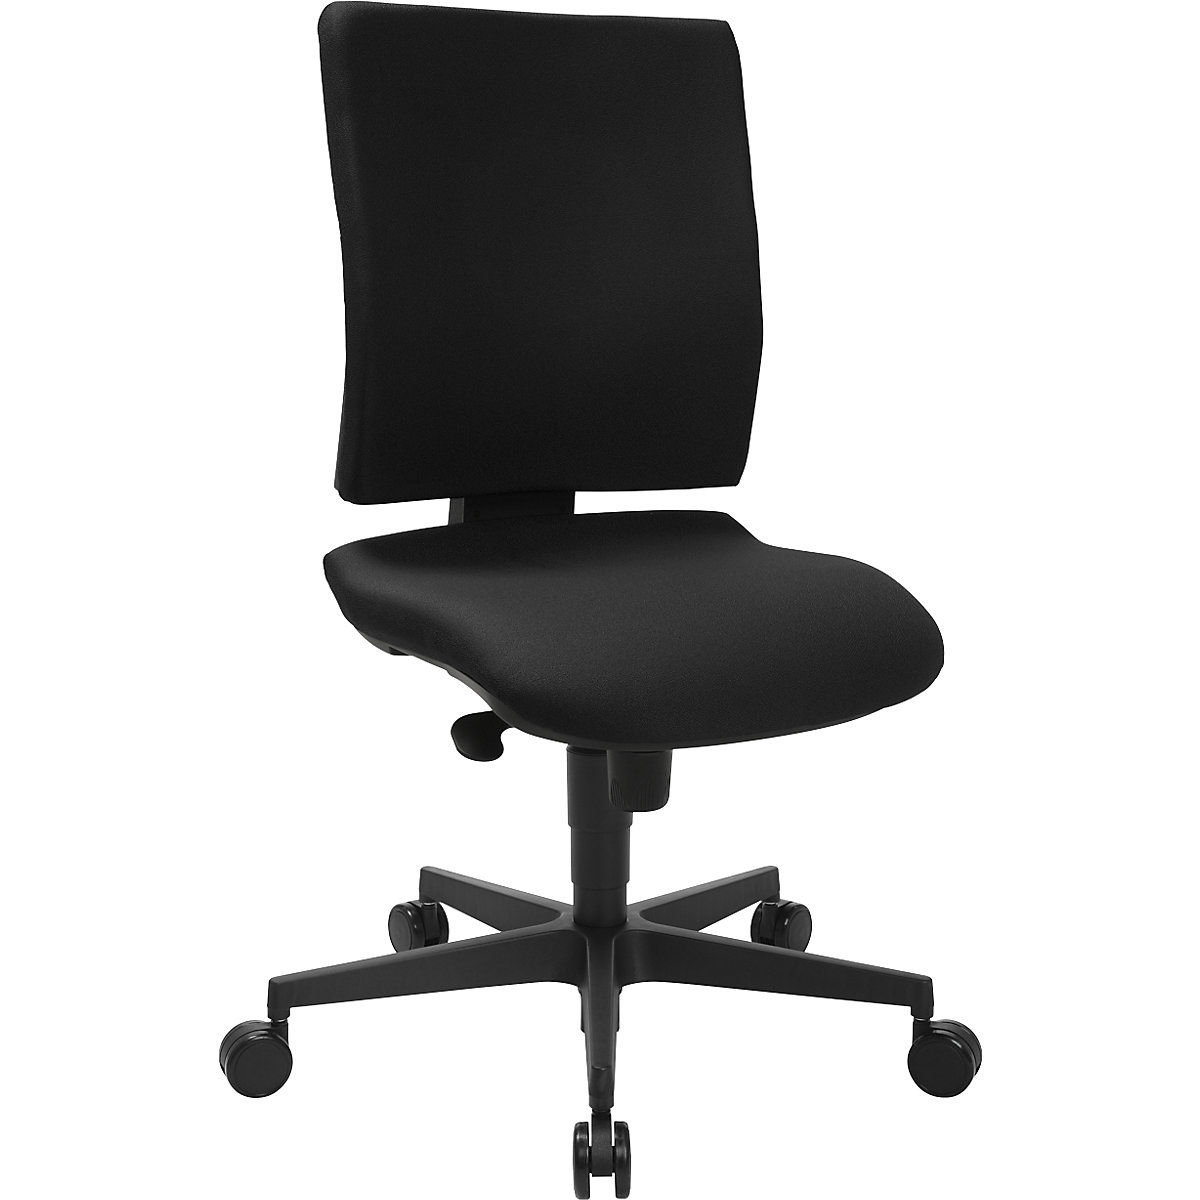 SYNCRO CLEAN office swivel chair - Topstar